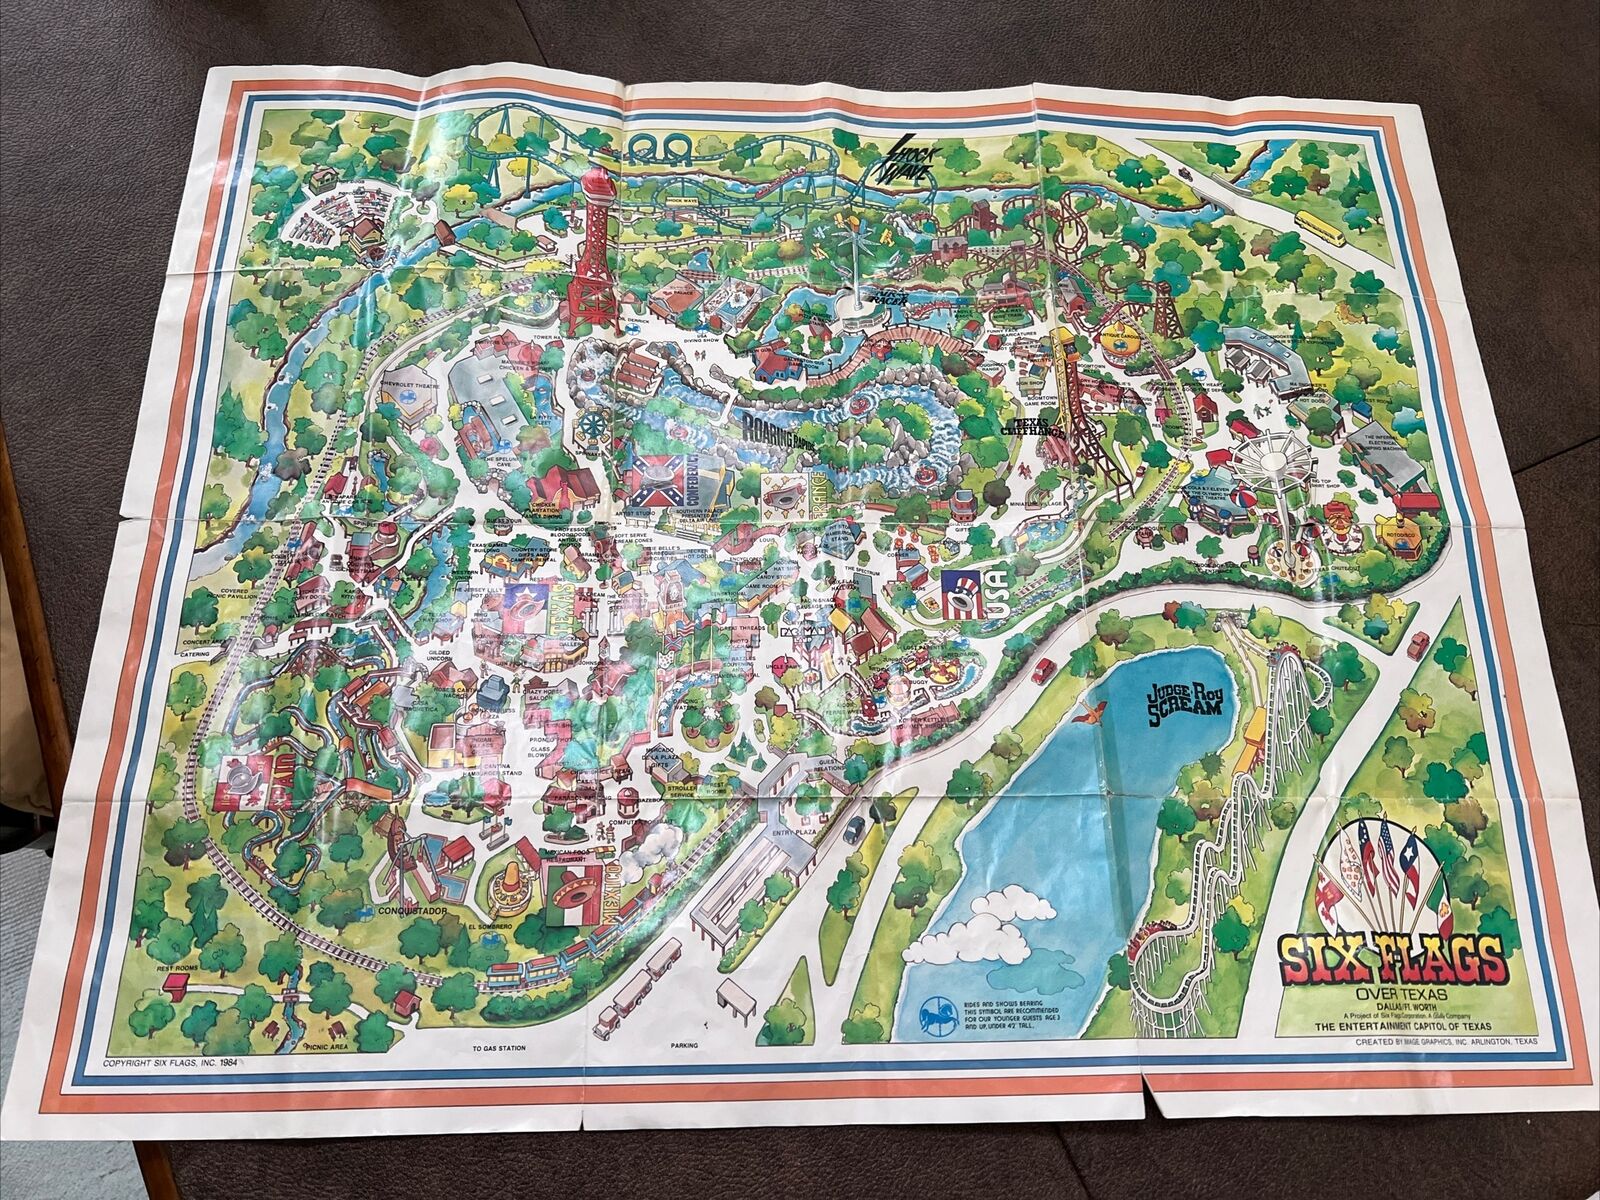 Six Flags Over Texas Dallas/Fort Worth Souvenir Map/Poster 1984